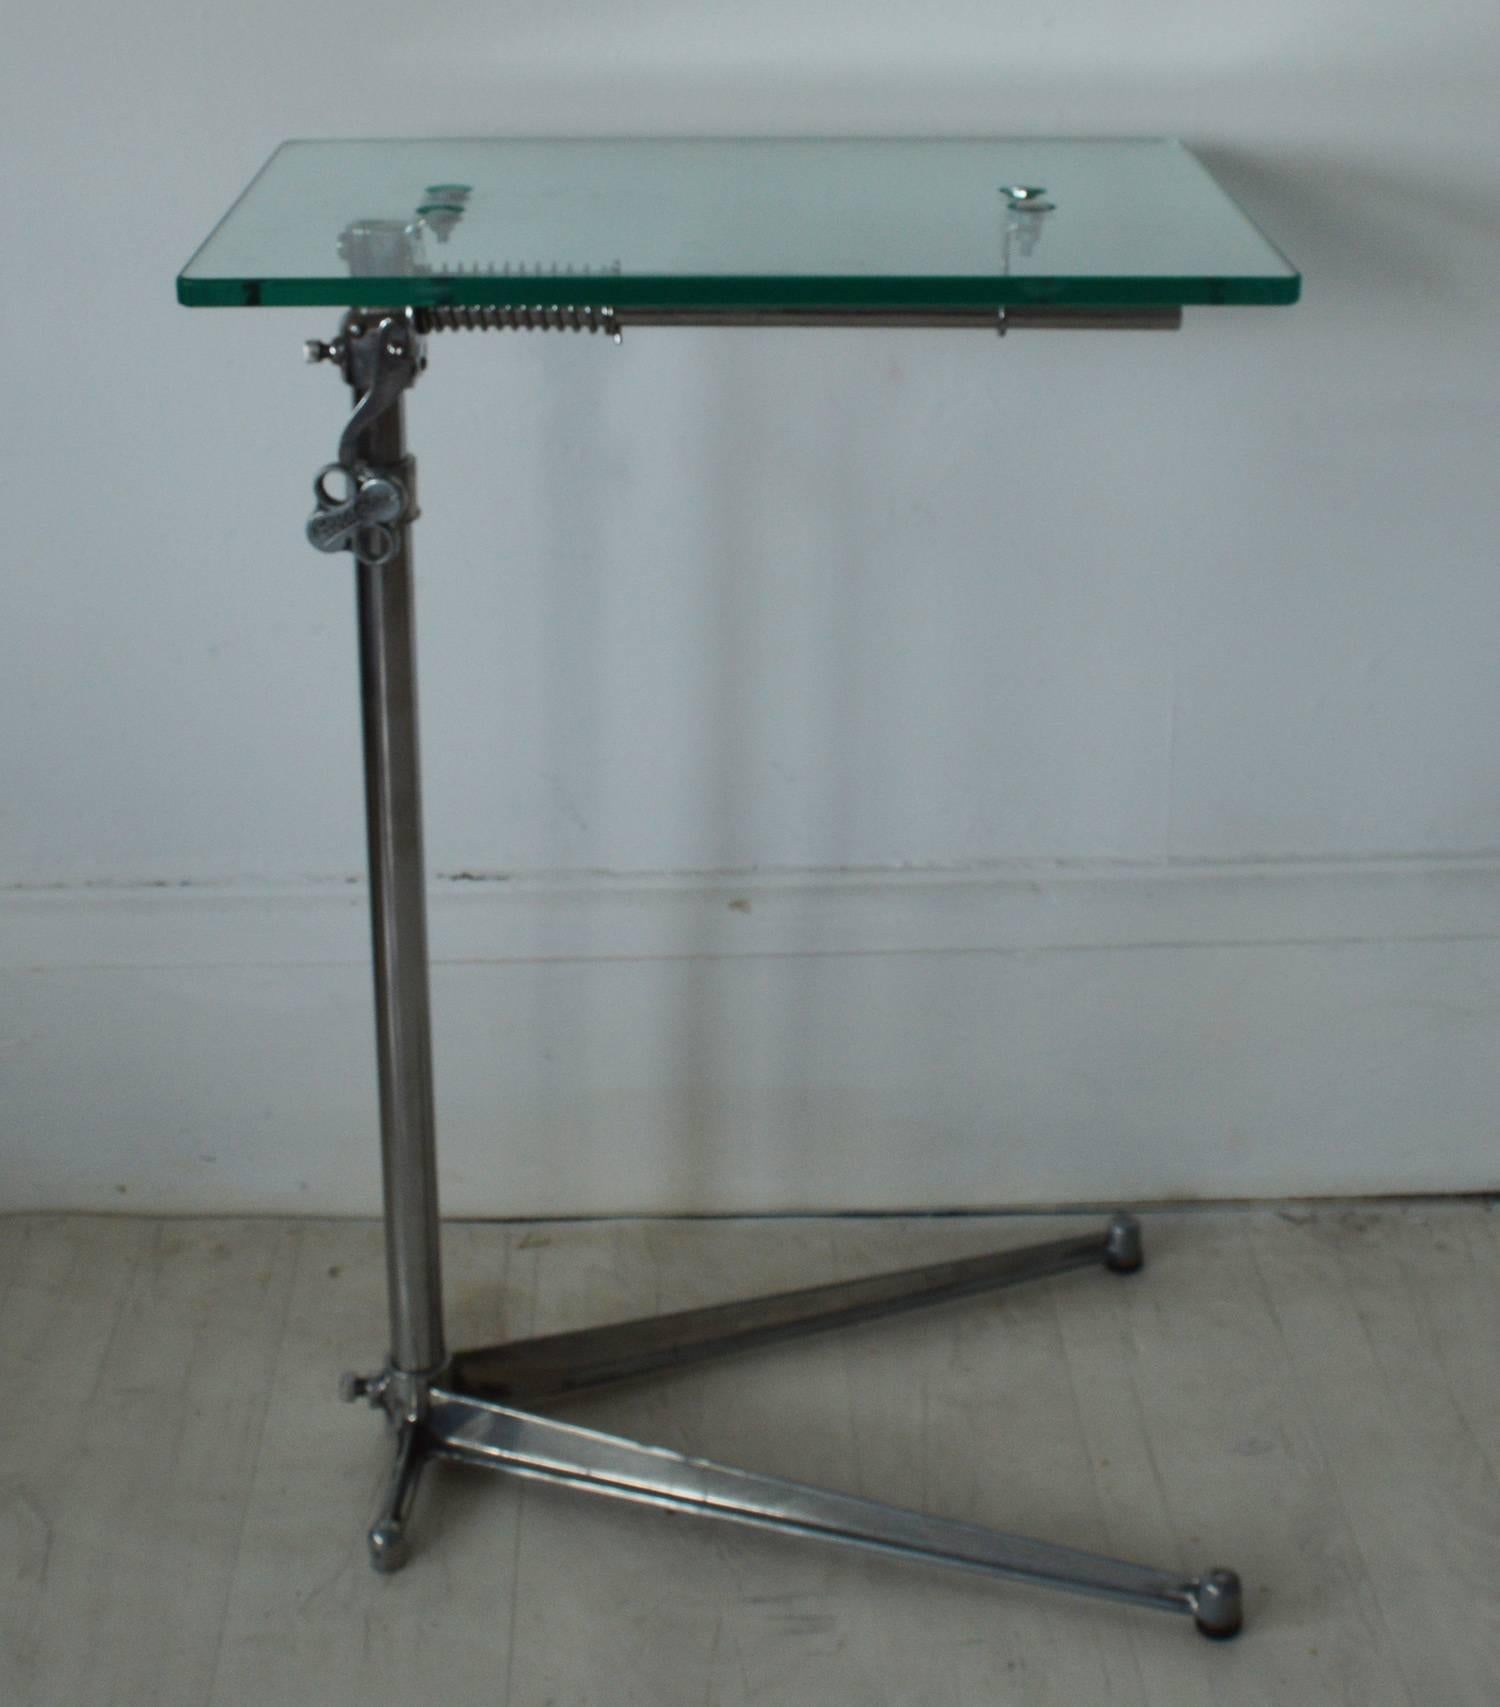 
Stylish side or work table with an elegant industrial look.

Made of polished steel and aluminium with a new toughened glass top.

The top is adjustable by loosening the handle on the side.

The top can also be tilted.

On two original